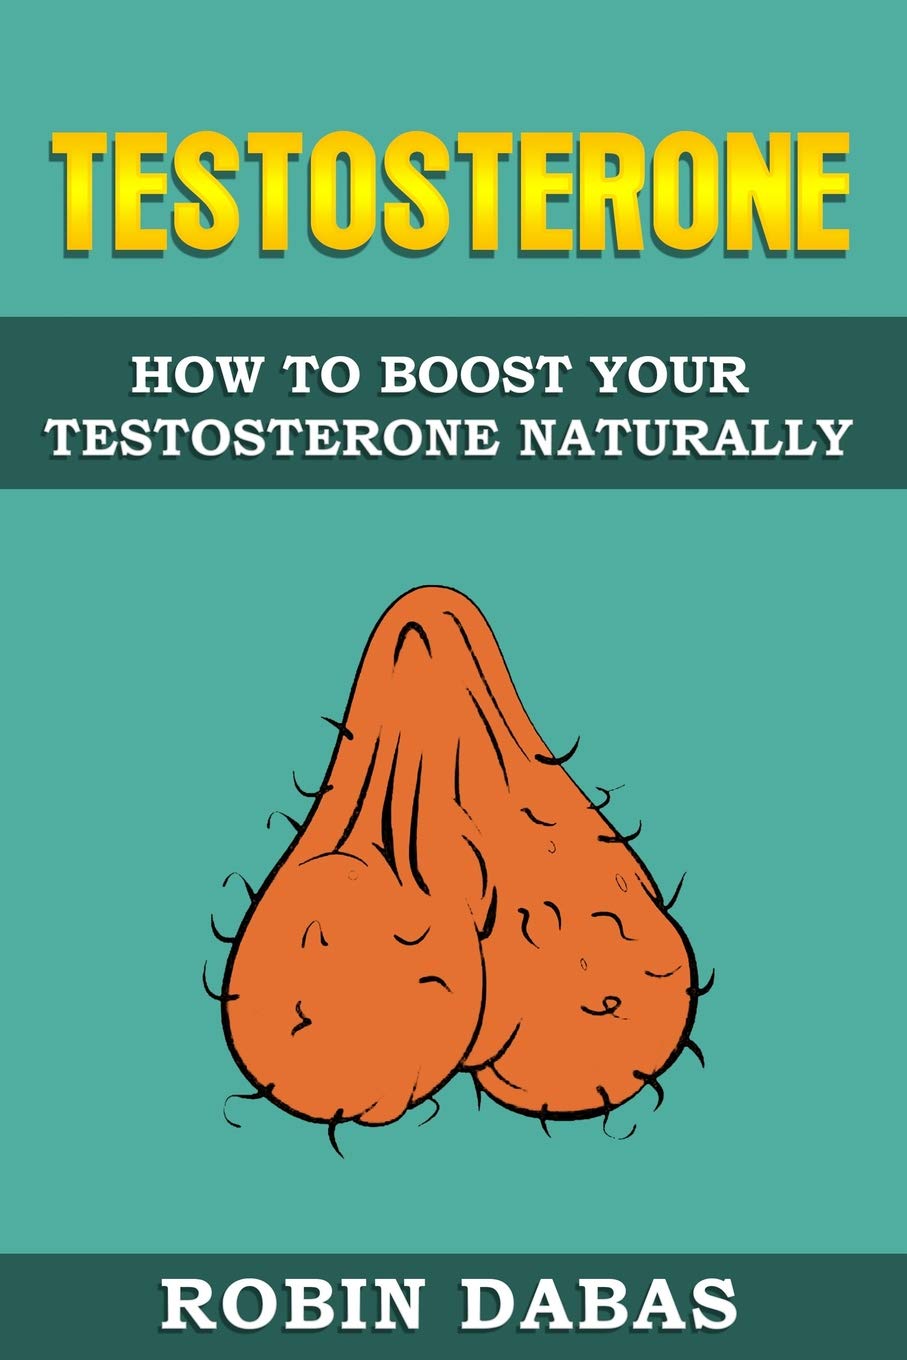 Boost Testosterone Naturally with